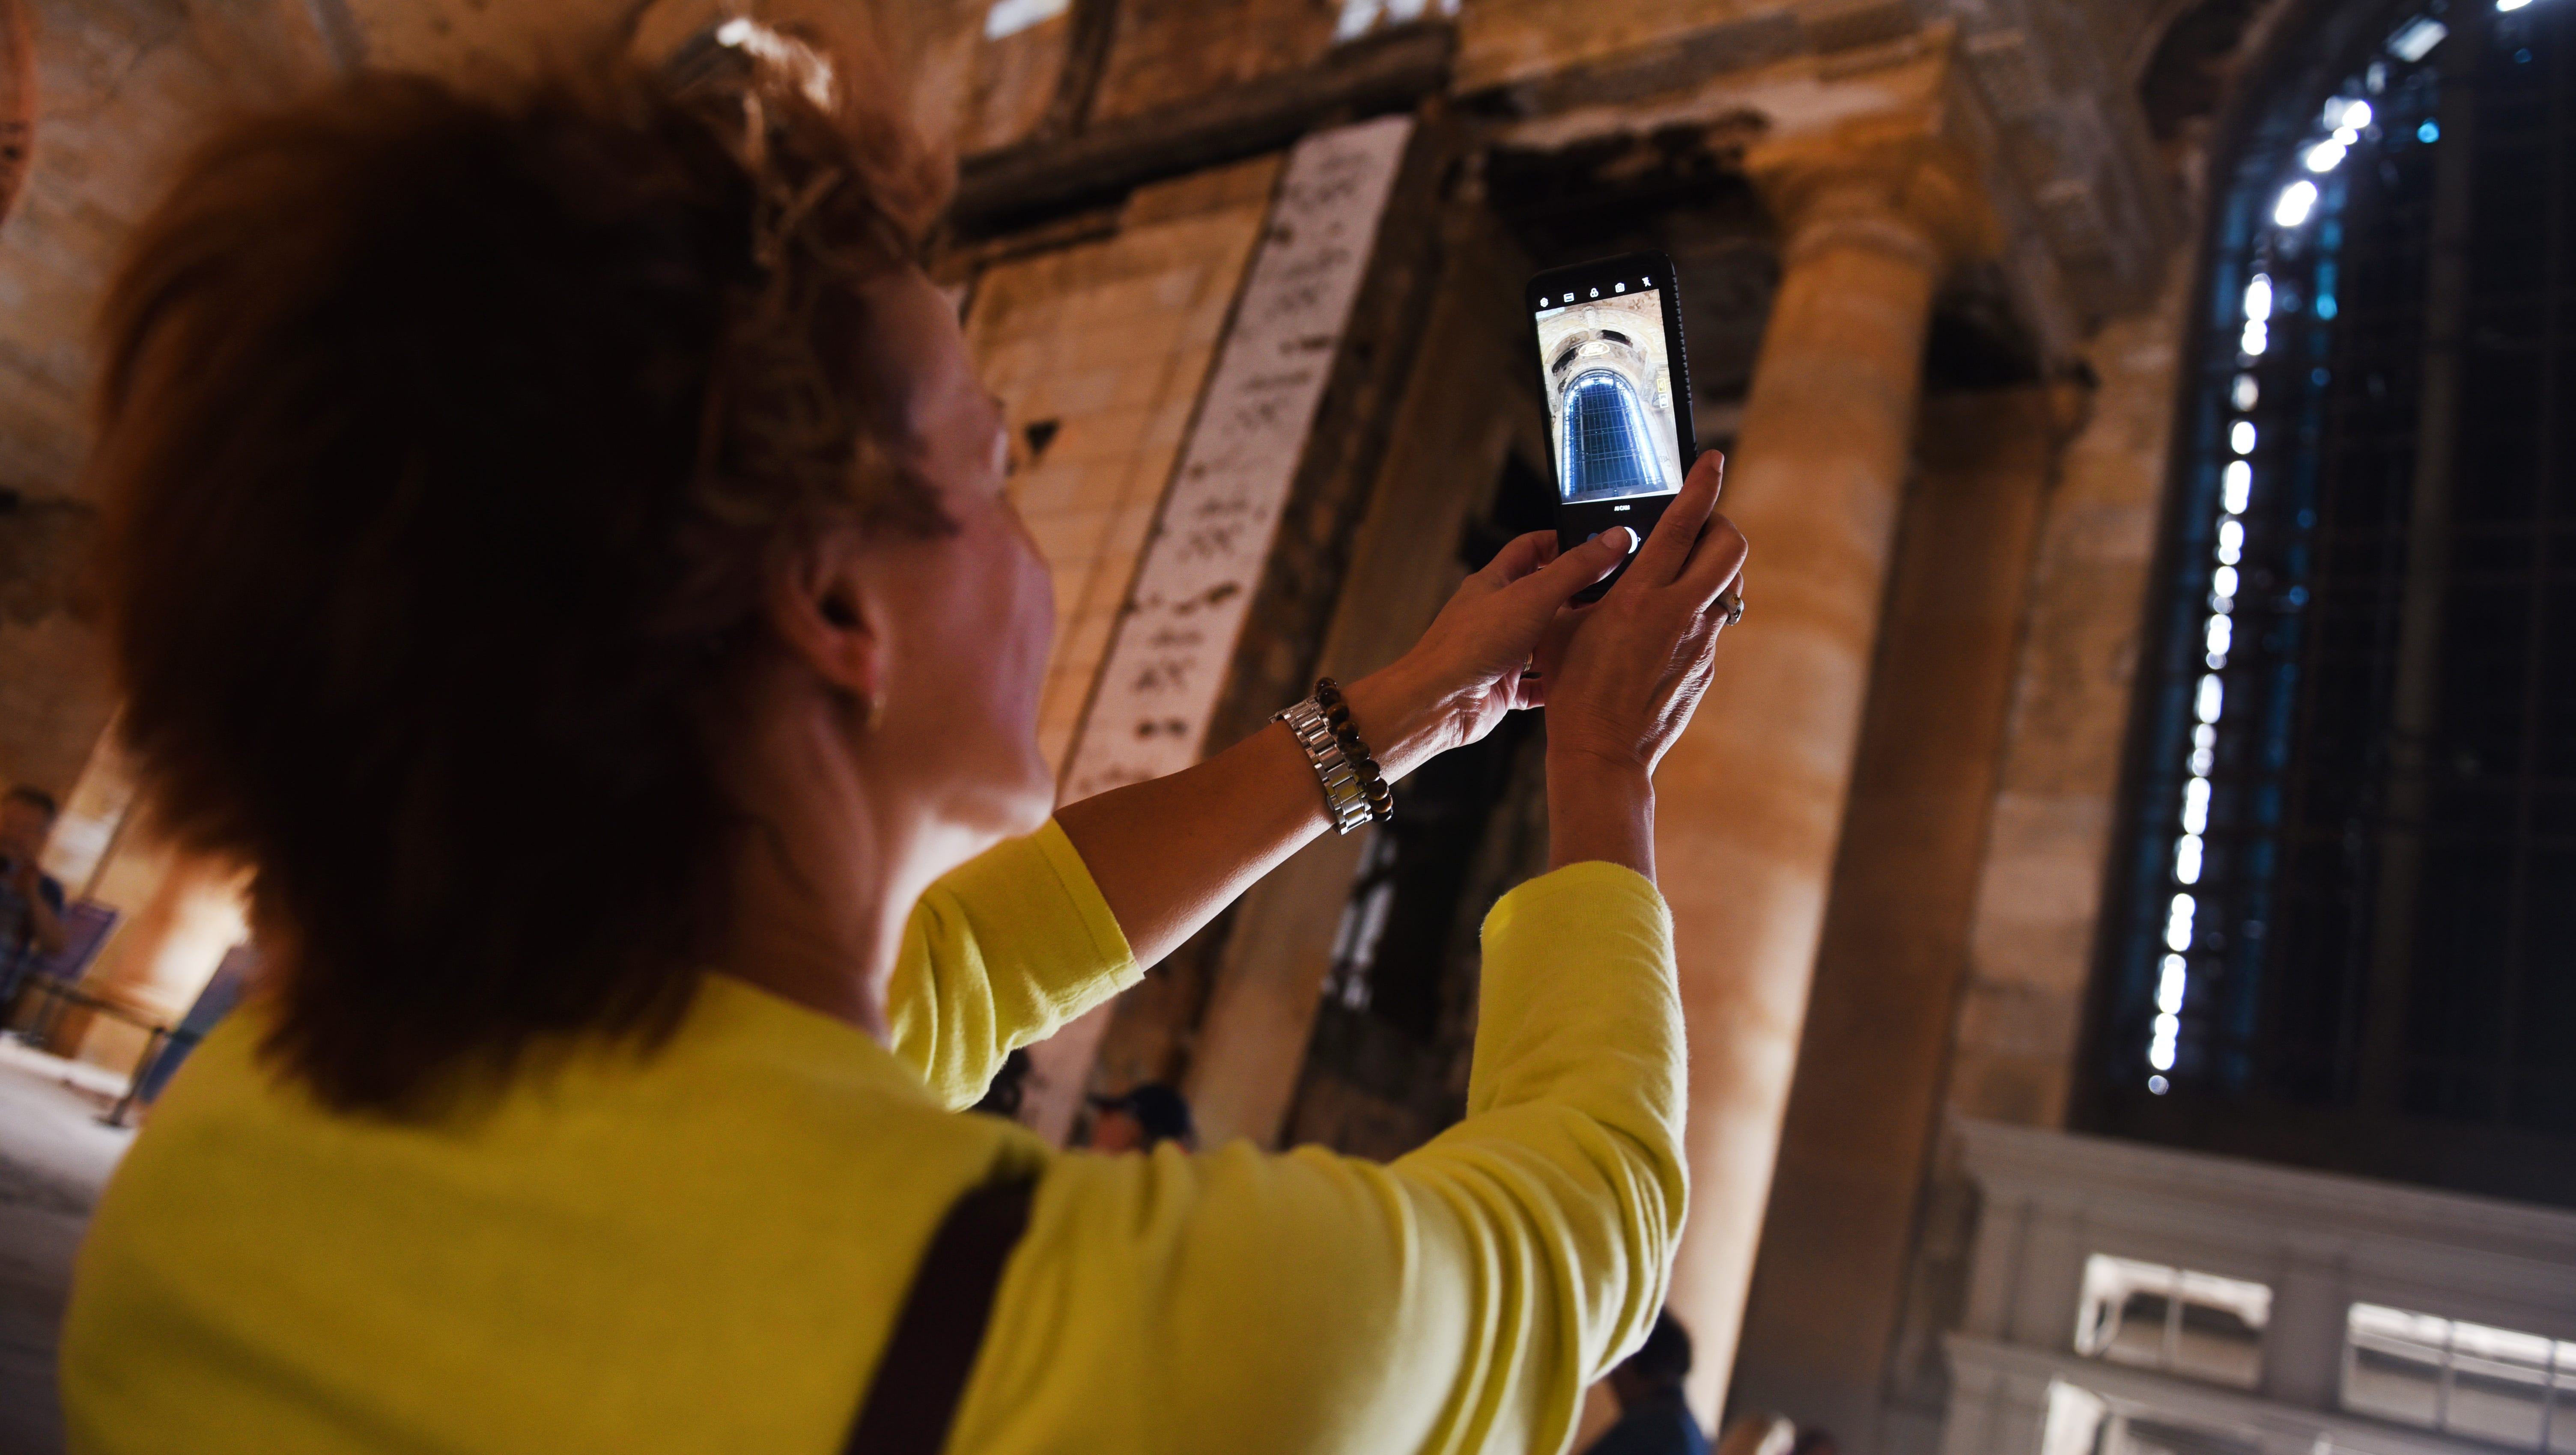 Jackie Lovejoy, president of the Dearborn chamber of commerce, uses her iPhone to photograph inside the Michigan Central Train Depot during Friday's open house.